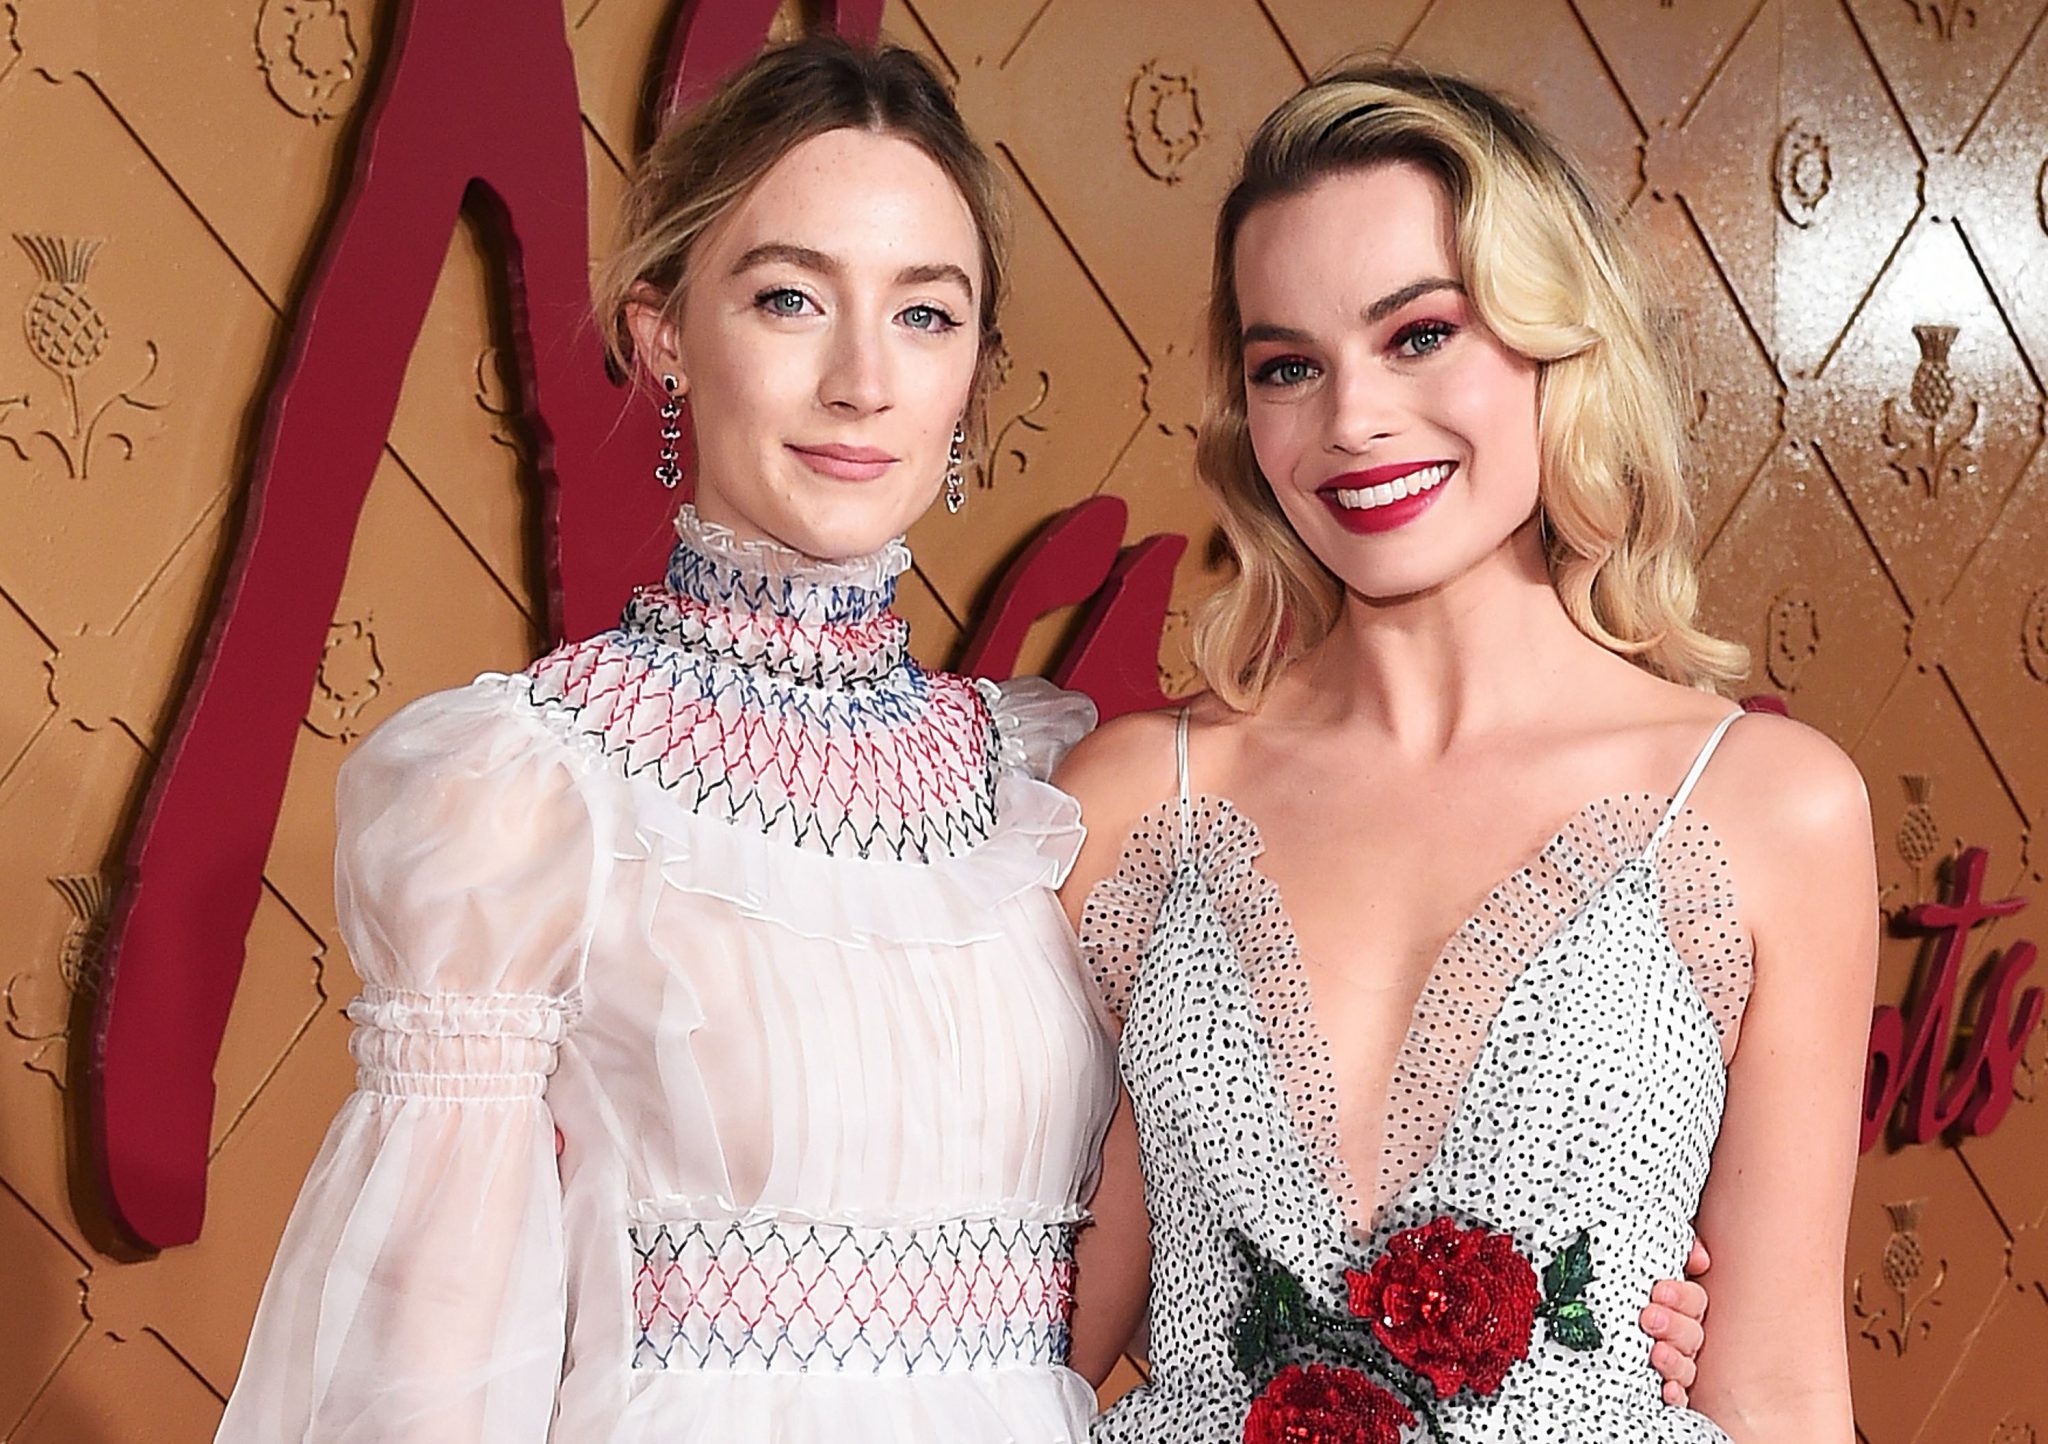 Margot Robbie and Saoirse Ronan Wallpapers